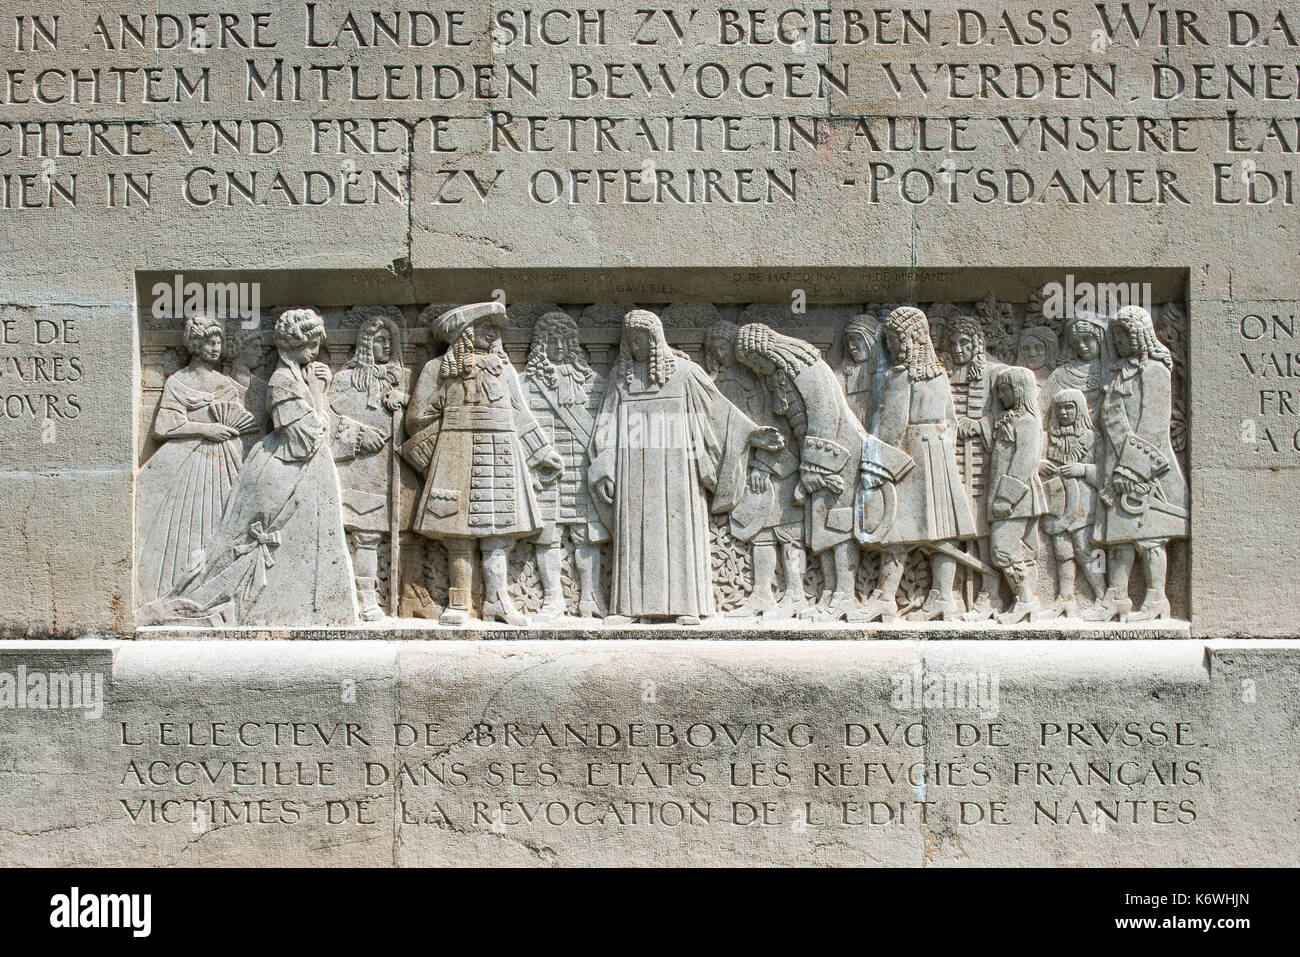 Elector Friedrich Wilhelm of Brandenburg takes up persecuted Huguenots, relief at the International Monument of the Reformation Stock Photo